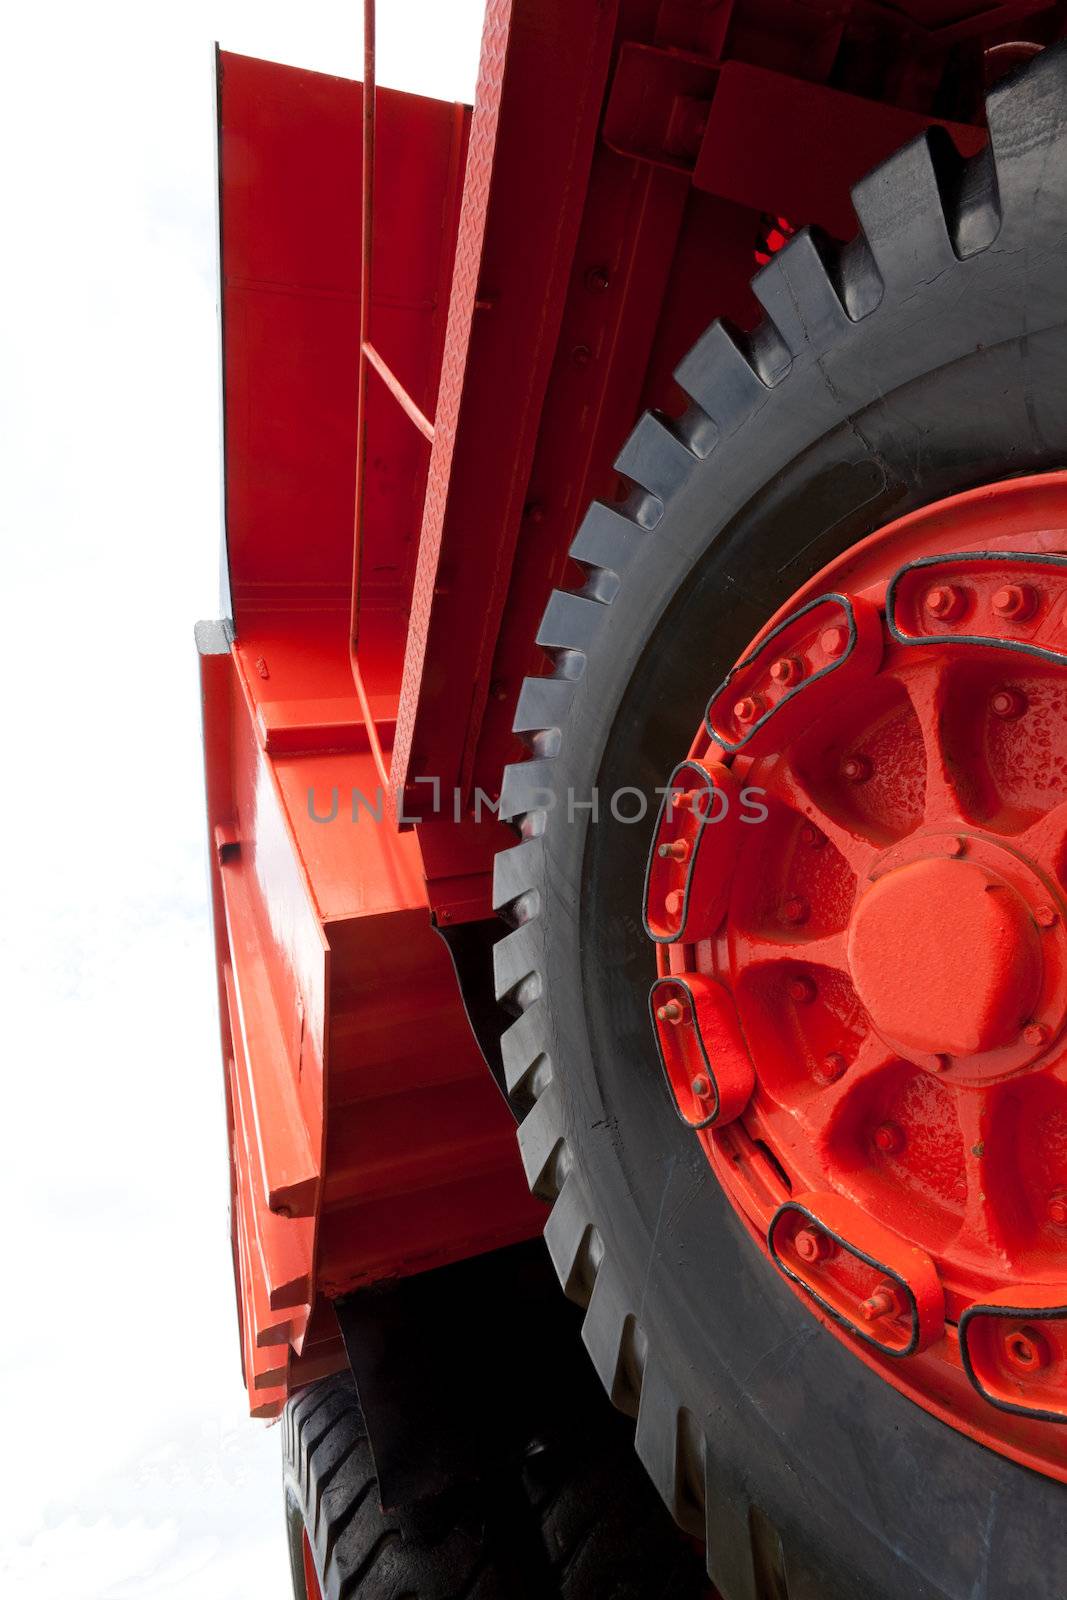 Wheels, rims and tires, and dump bucket of vinatge giant mining truck. Extreme perspective.